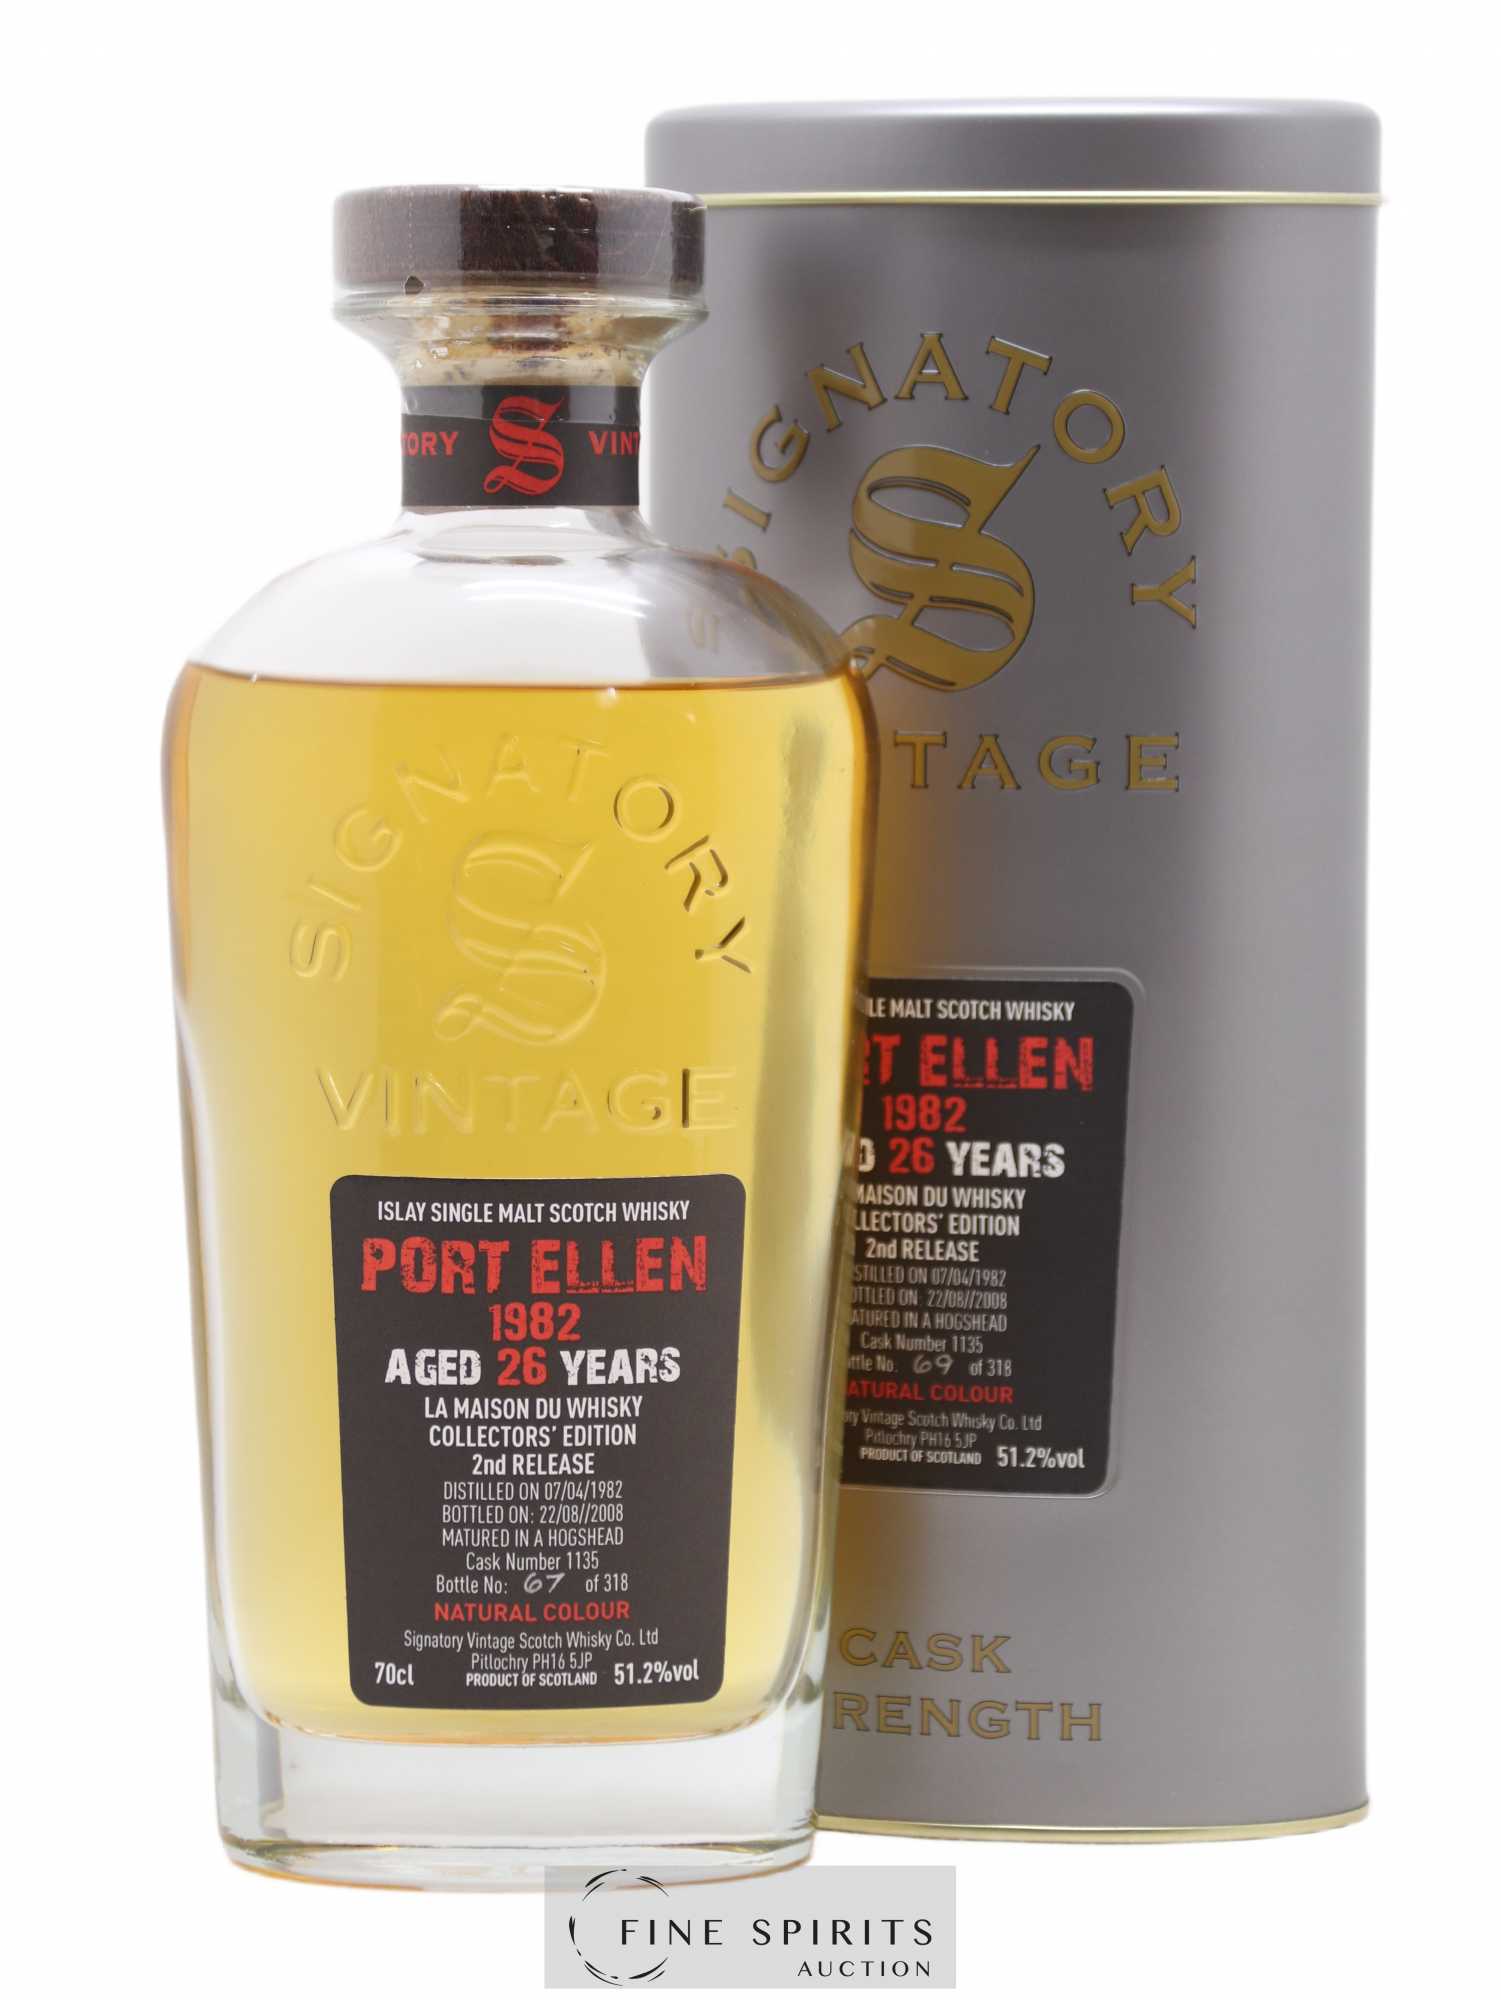 Port Ellen 26 years 1982 Signatory Vintage Collectors Edition 2nd Release Cask n°1135 - One of 318 - bottled 2008 LMDW Cask Strength Collection 